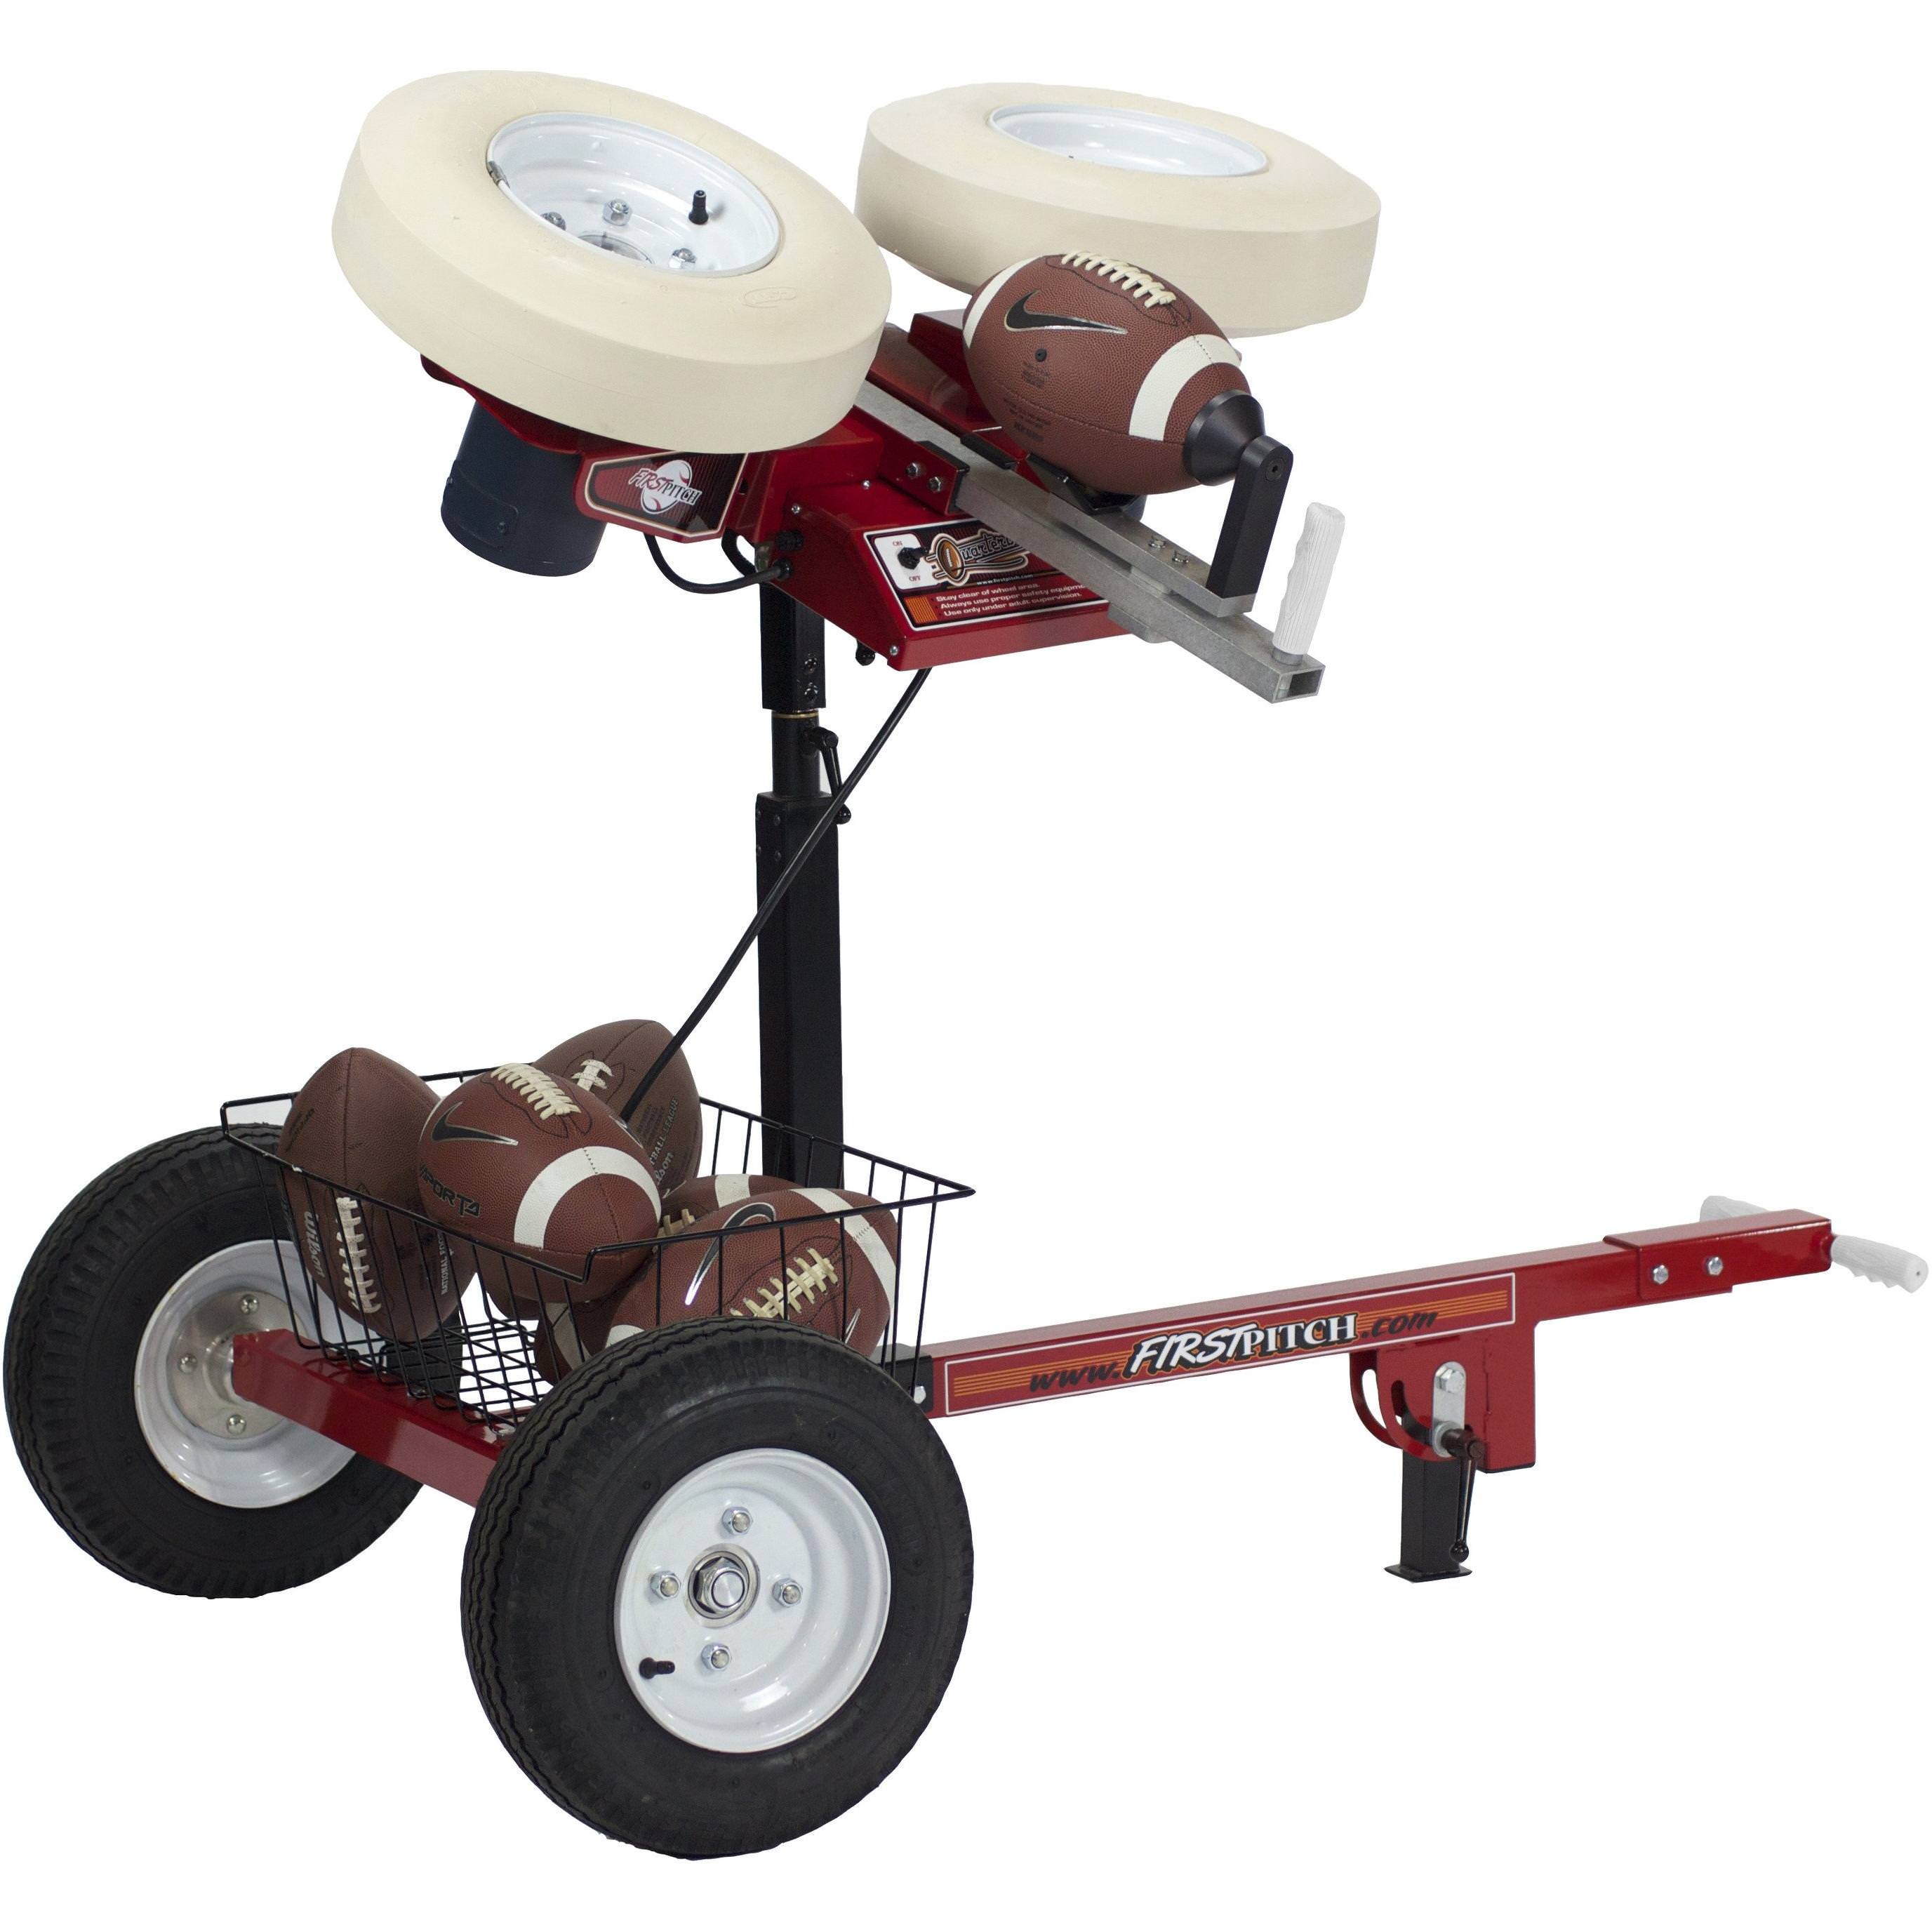 First Pitch Transporter Pro Pitching Machine Transport Front Right Side View